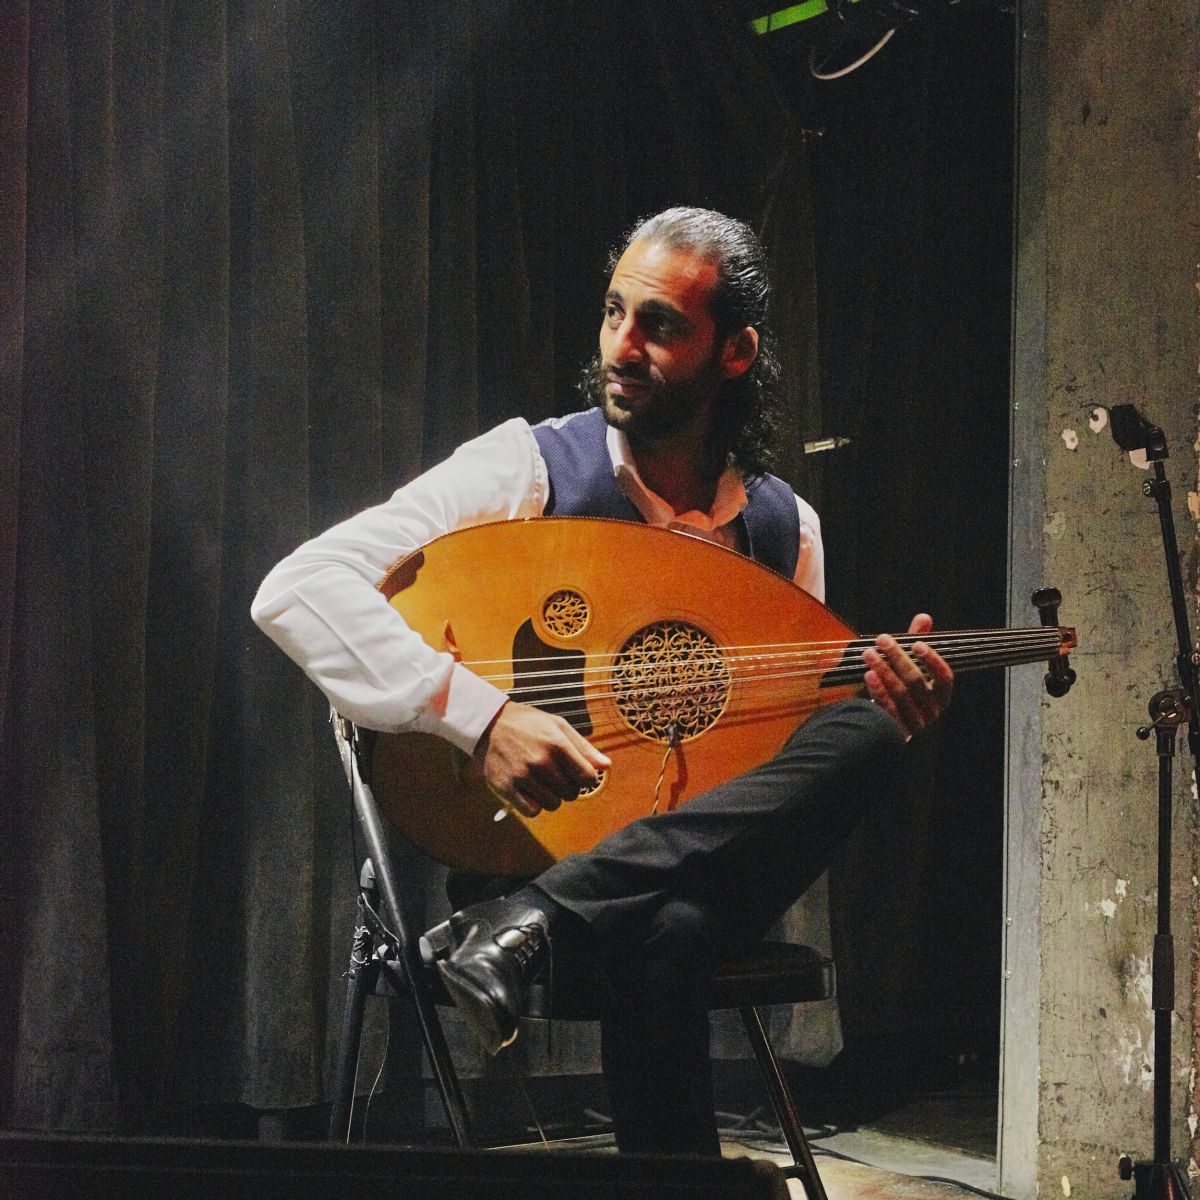 A musician sitting on a stool holding an oud